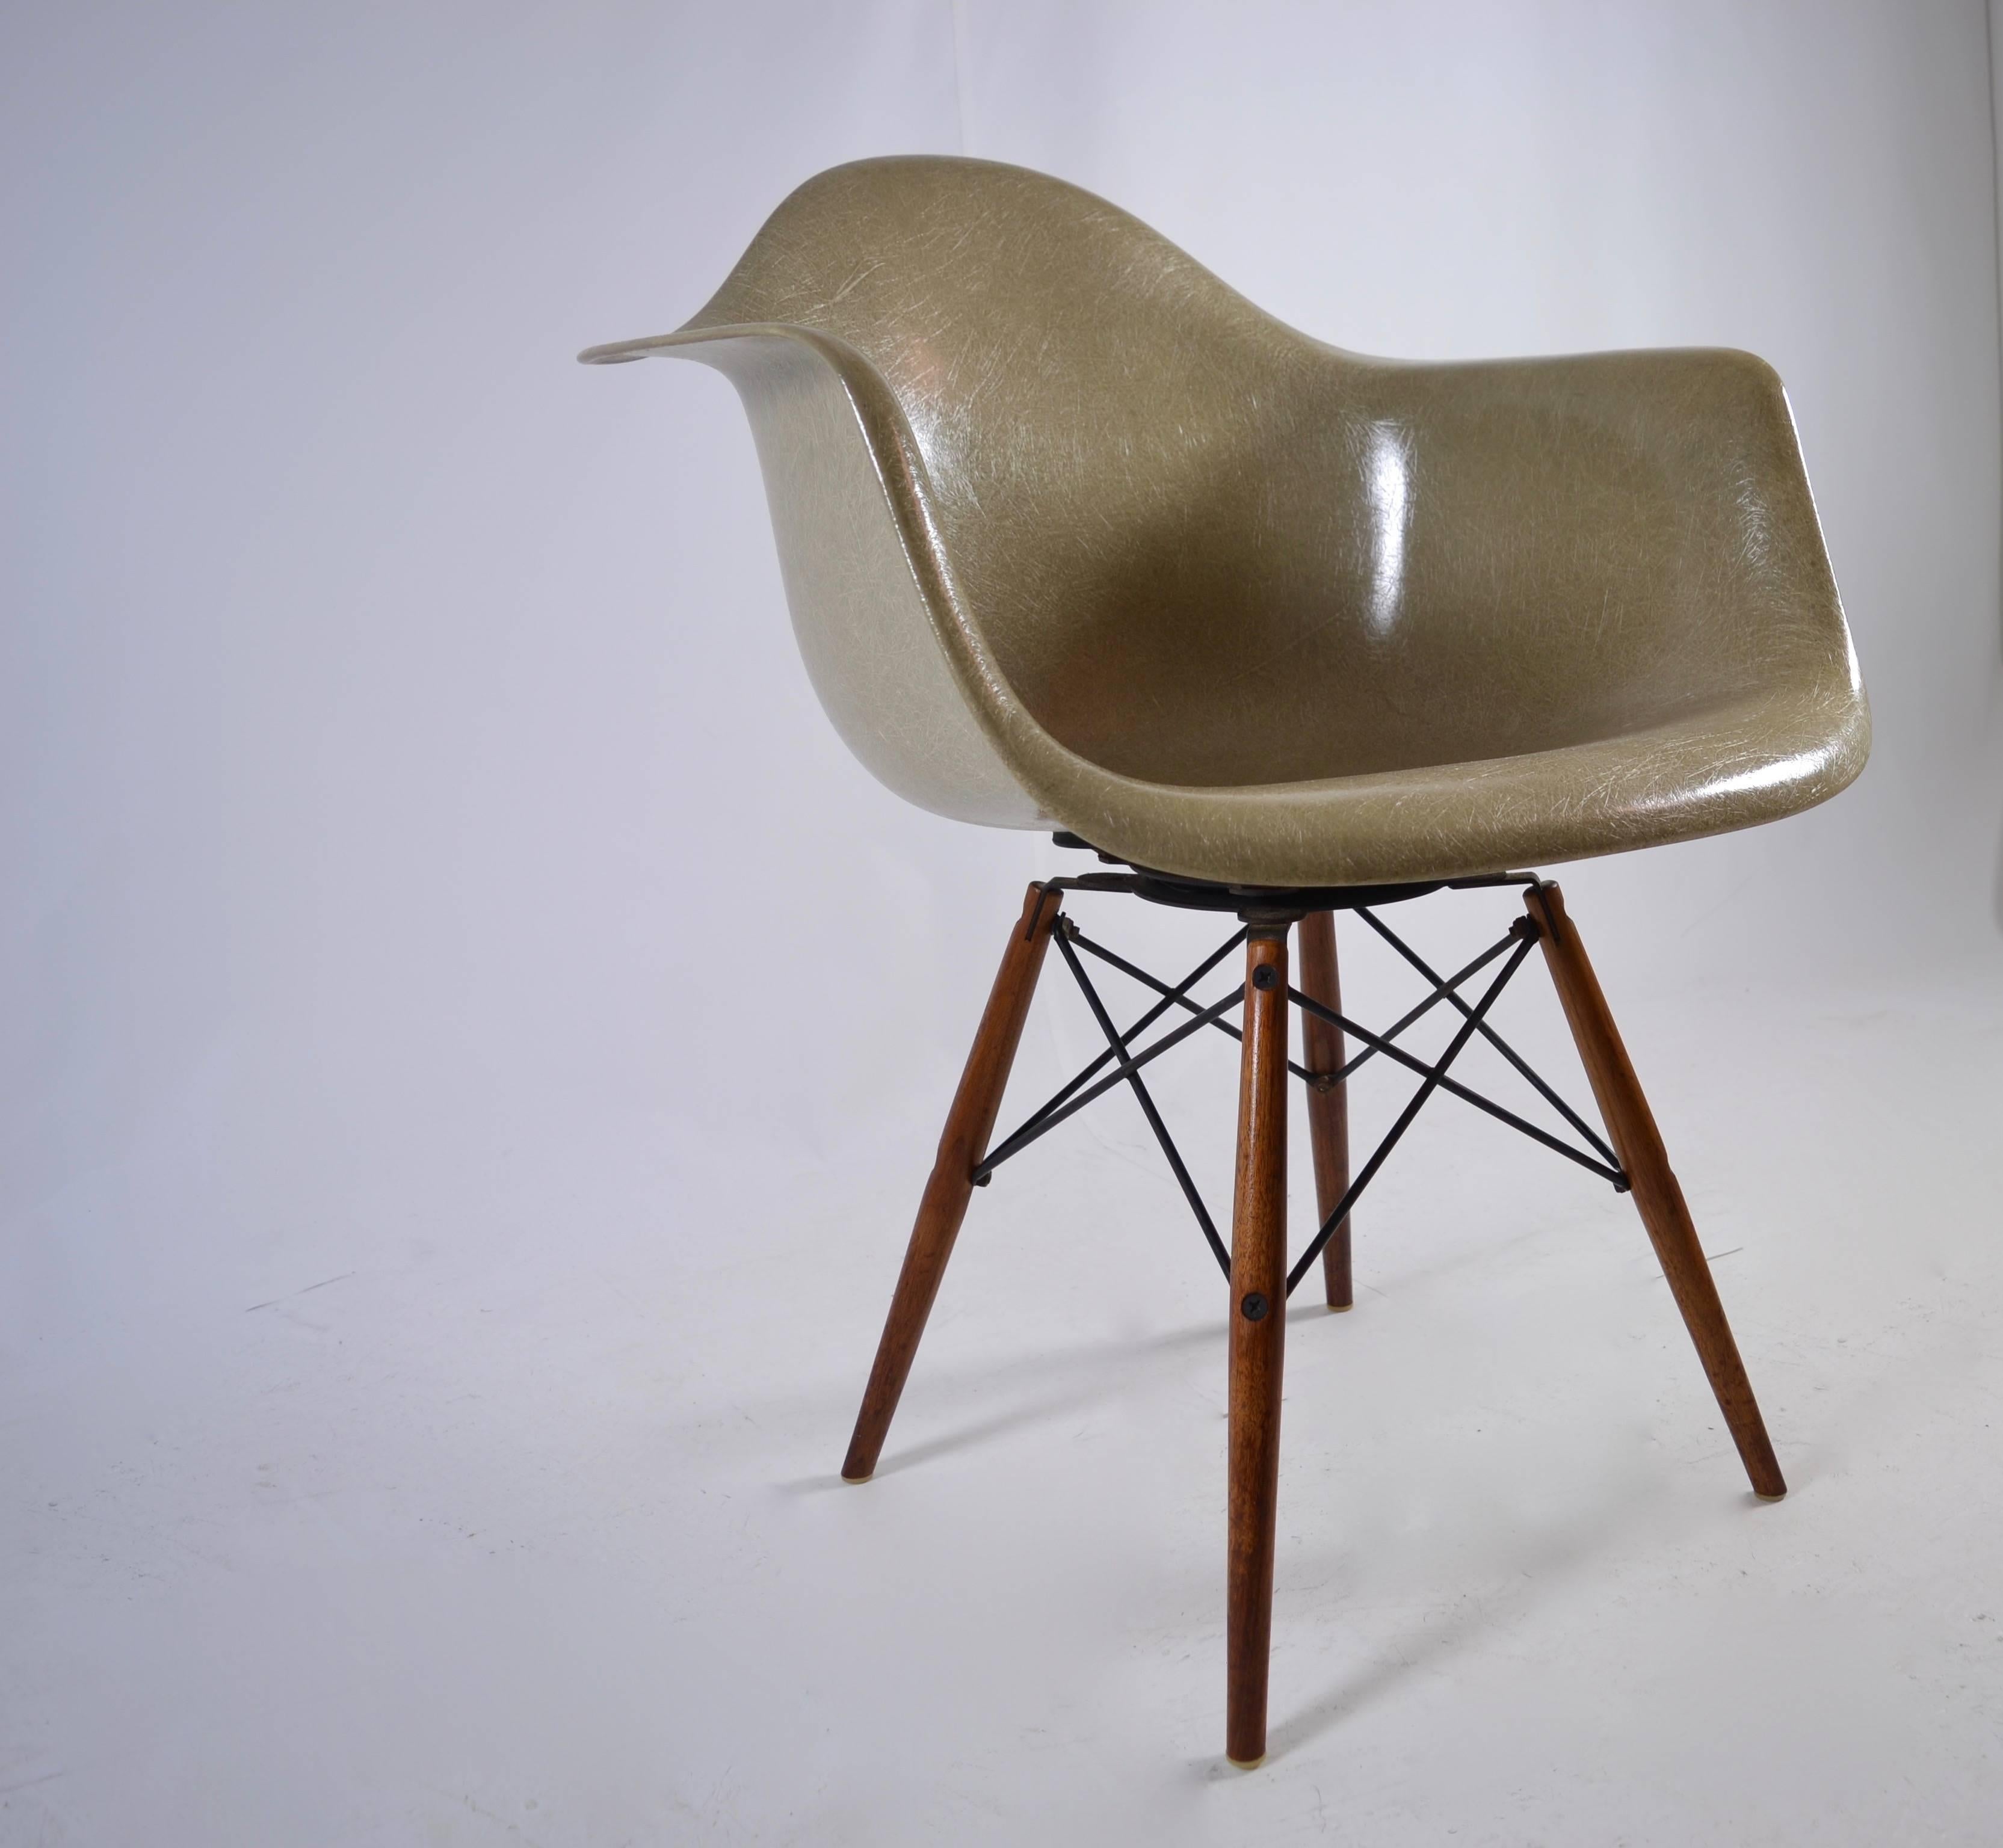 In exceptional condition, with original checkerboard logo fully intact, an early swivel PAW chair by Charles and Ray Eames with walnut dowel legs. Fiberglass body (with rope edge by Zenith plastics.